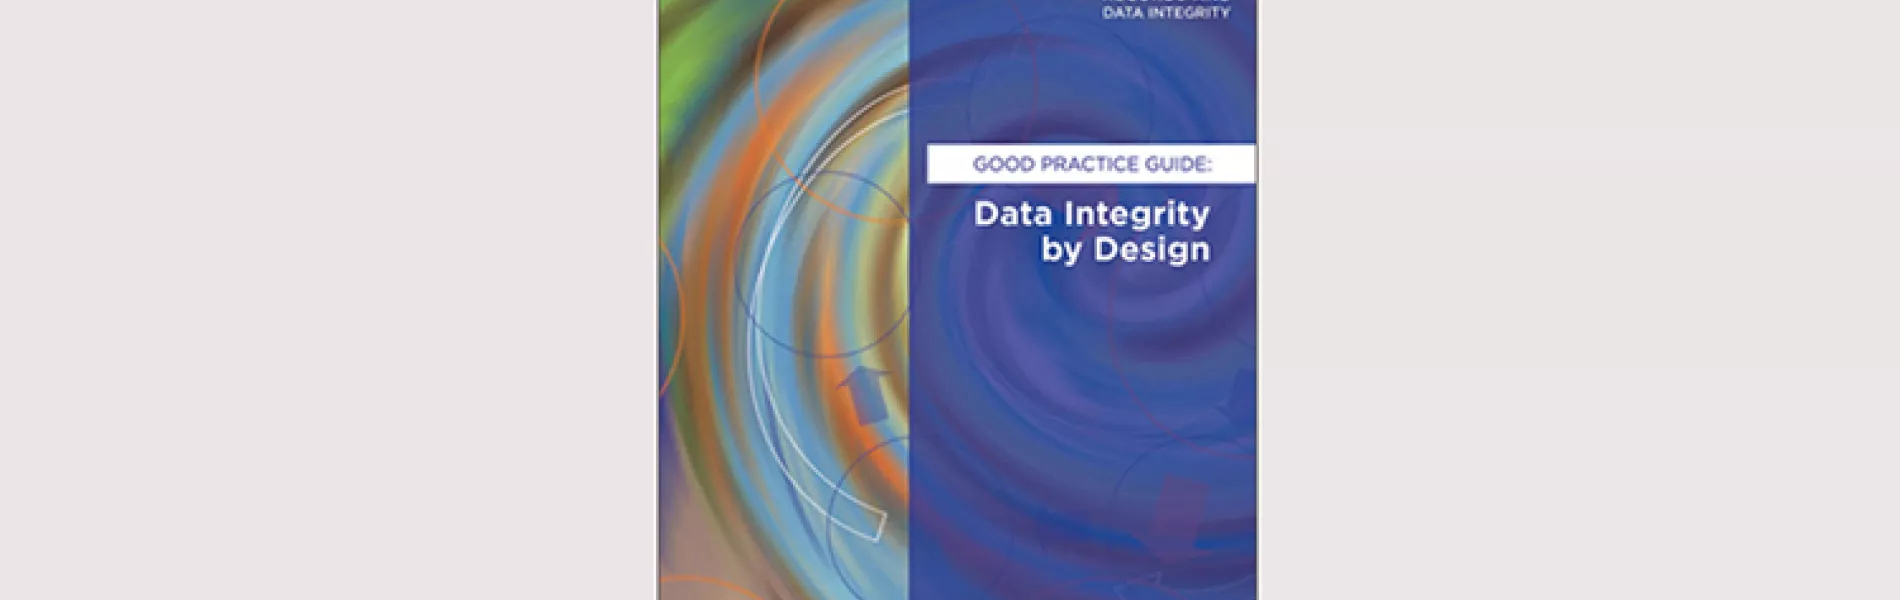 New Guidance Document Available on Data Integrity by Design